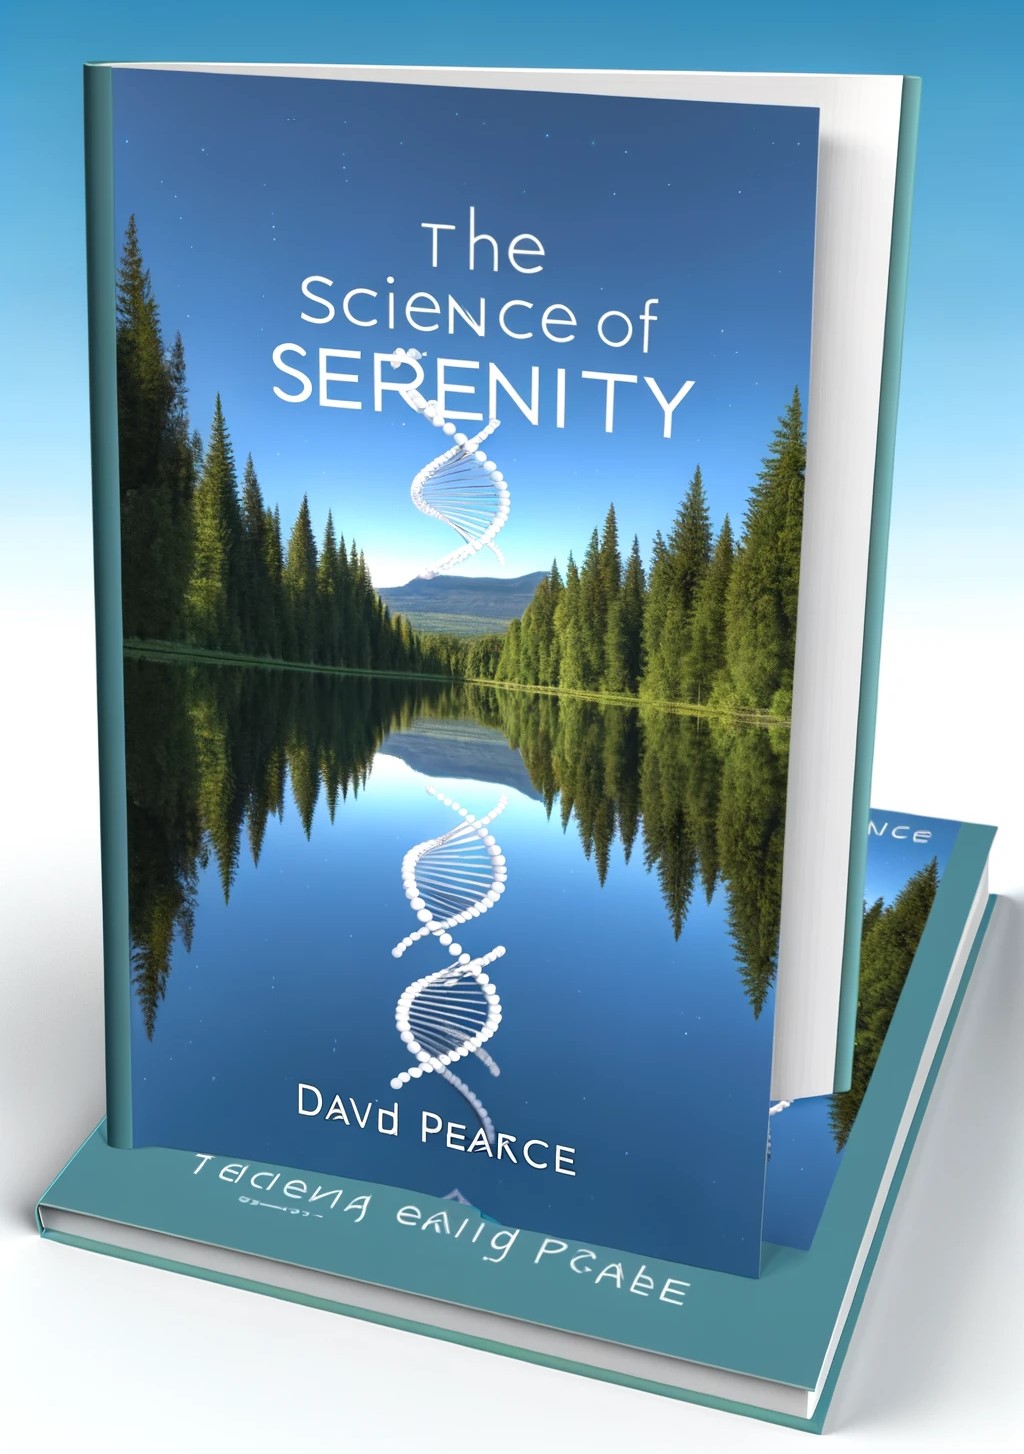 The Science of Serenity